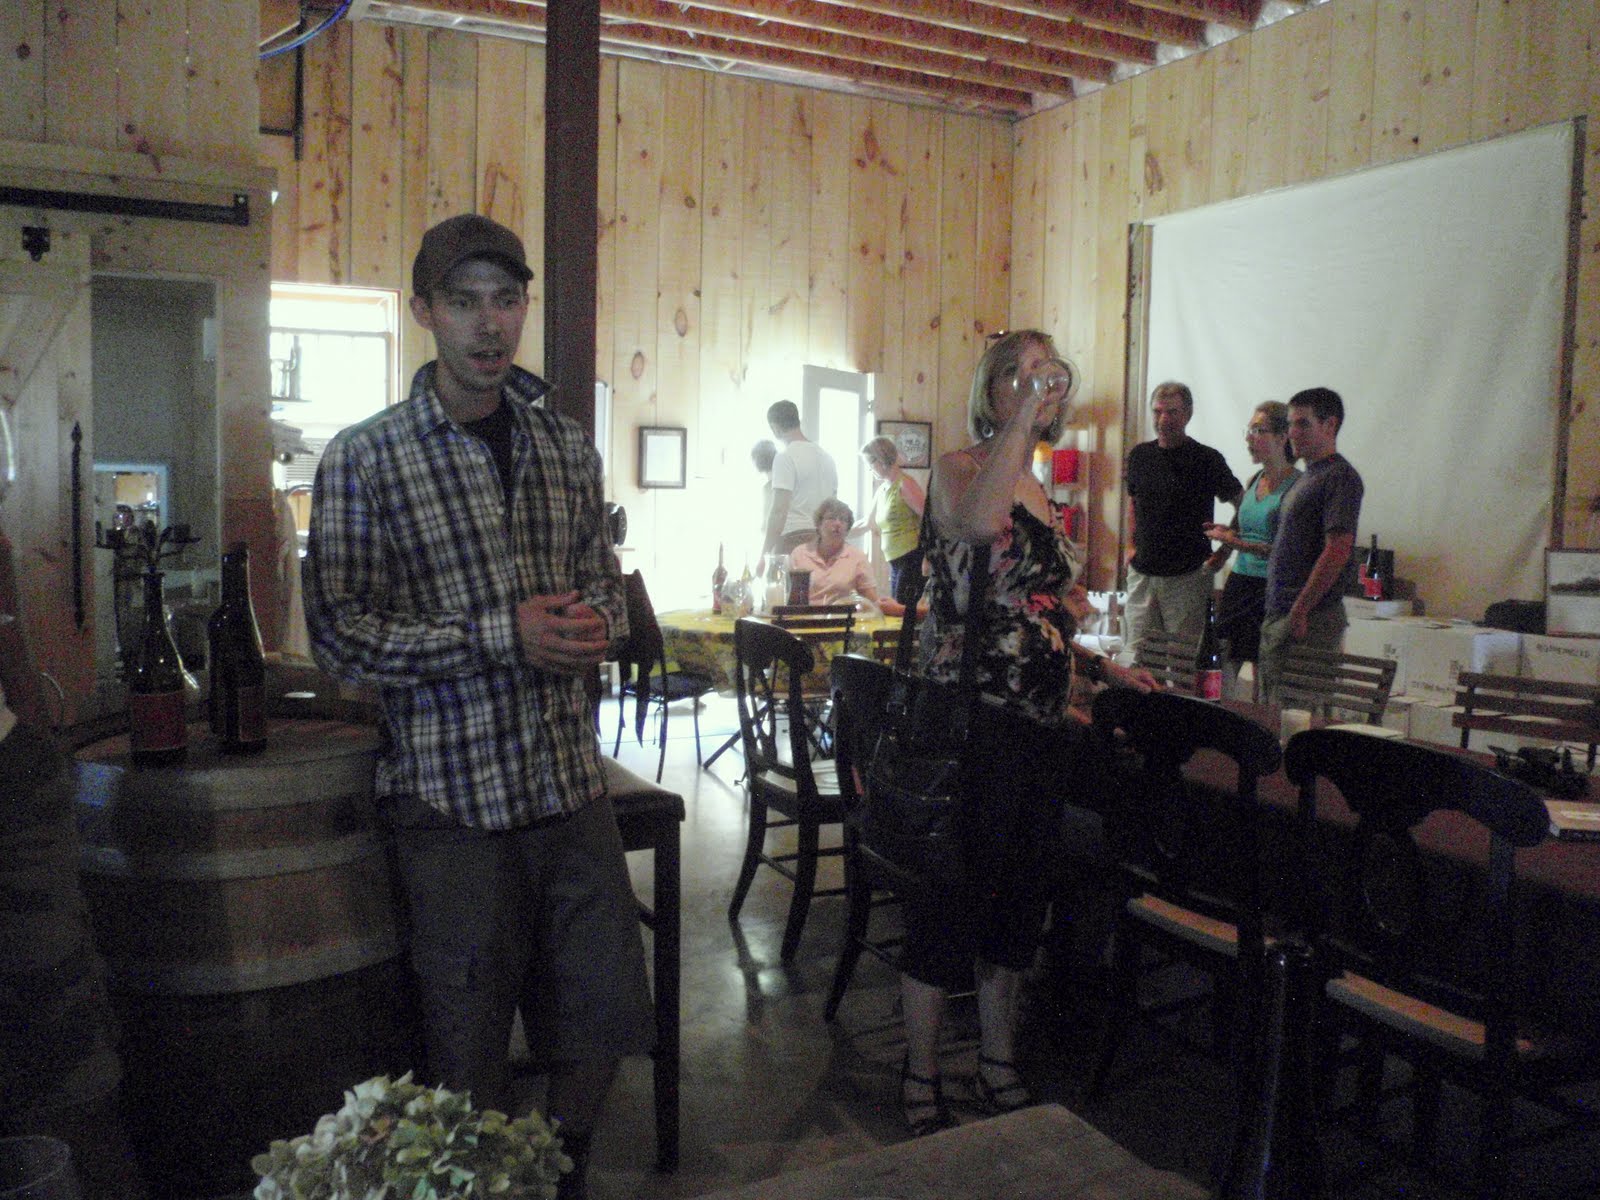 The owner Wes, is the winemaker and proprietor. Don't miss this winery.